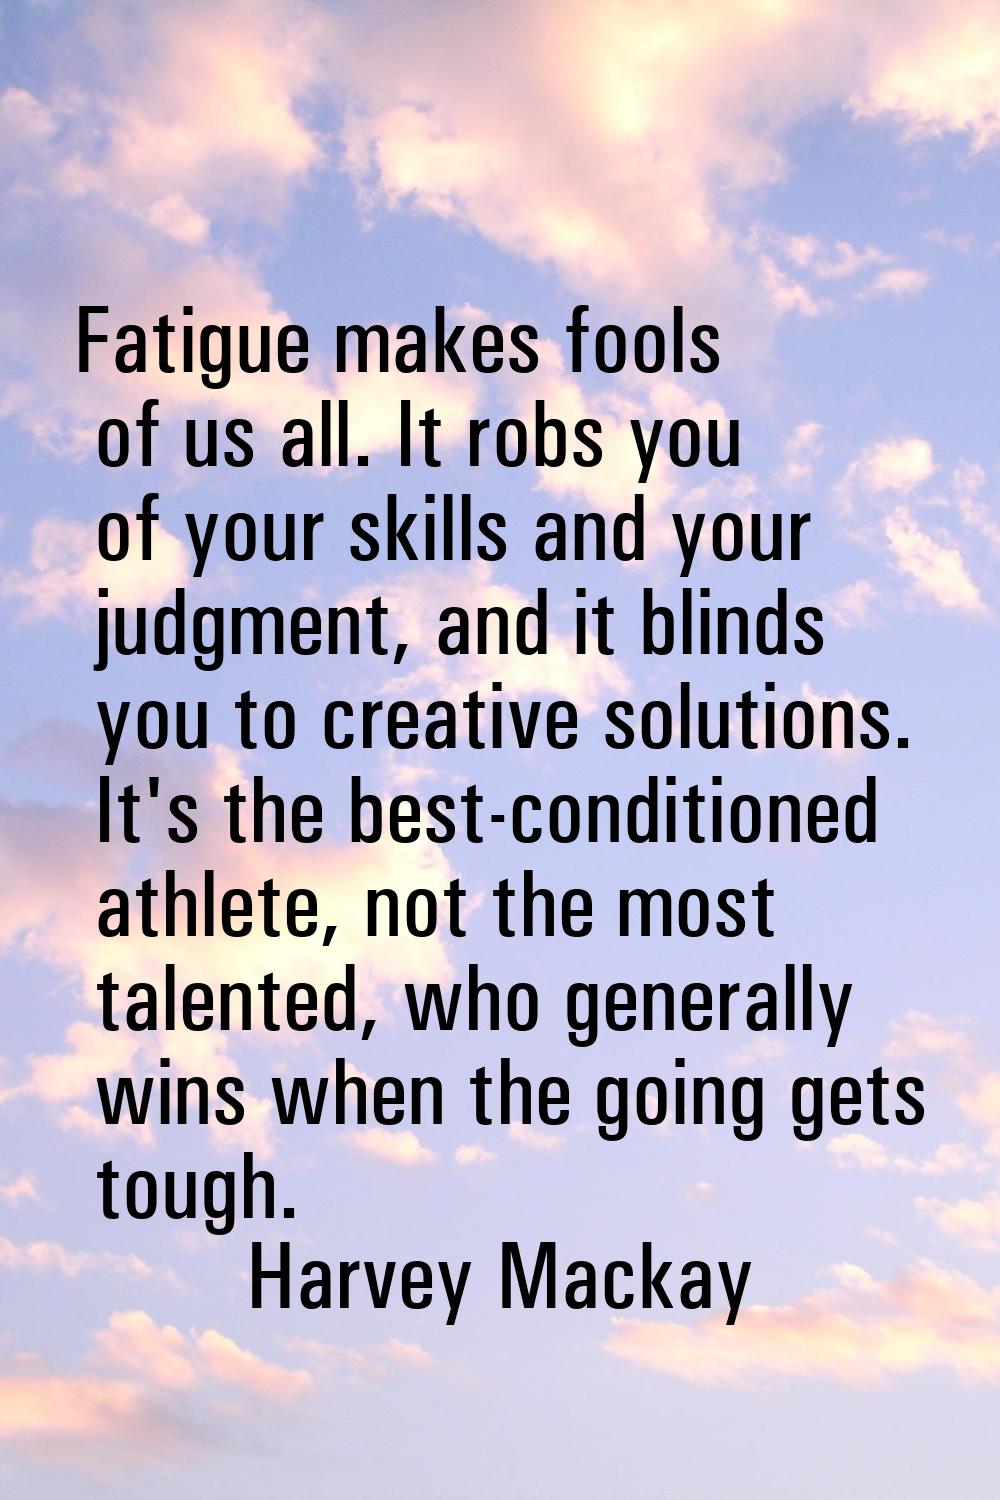 Fatigue makes fools of us all. It robs you of your skills and your judgment, and it blinds you to c